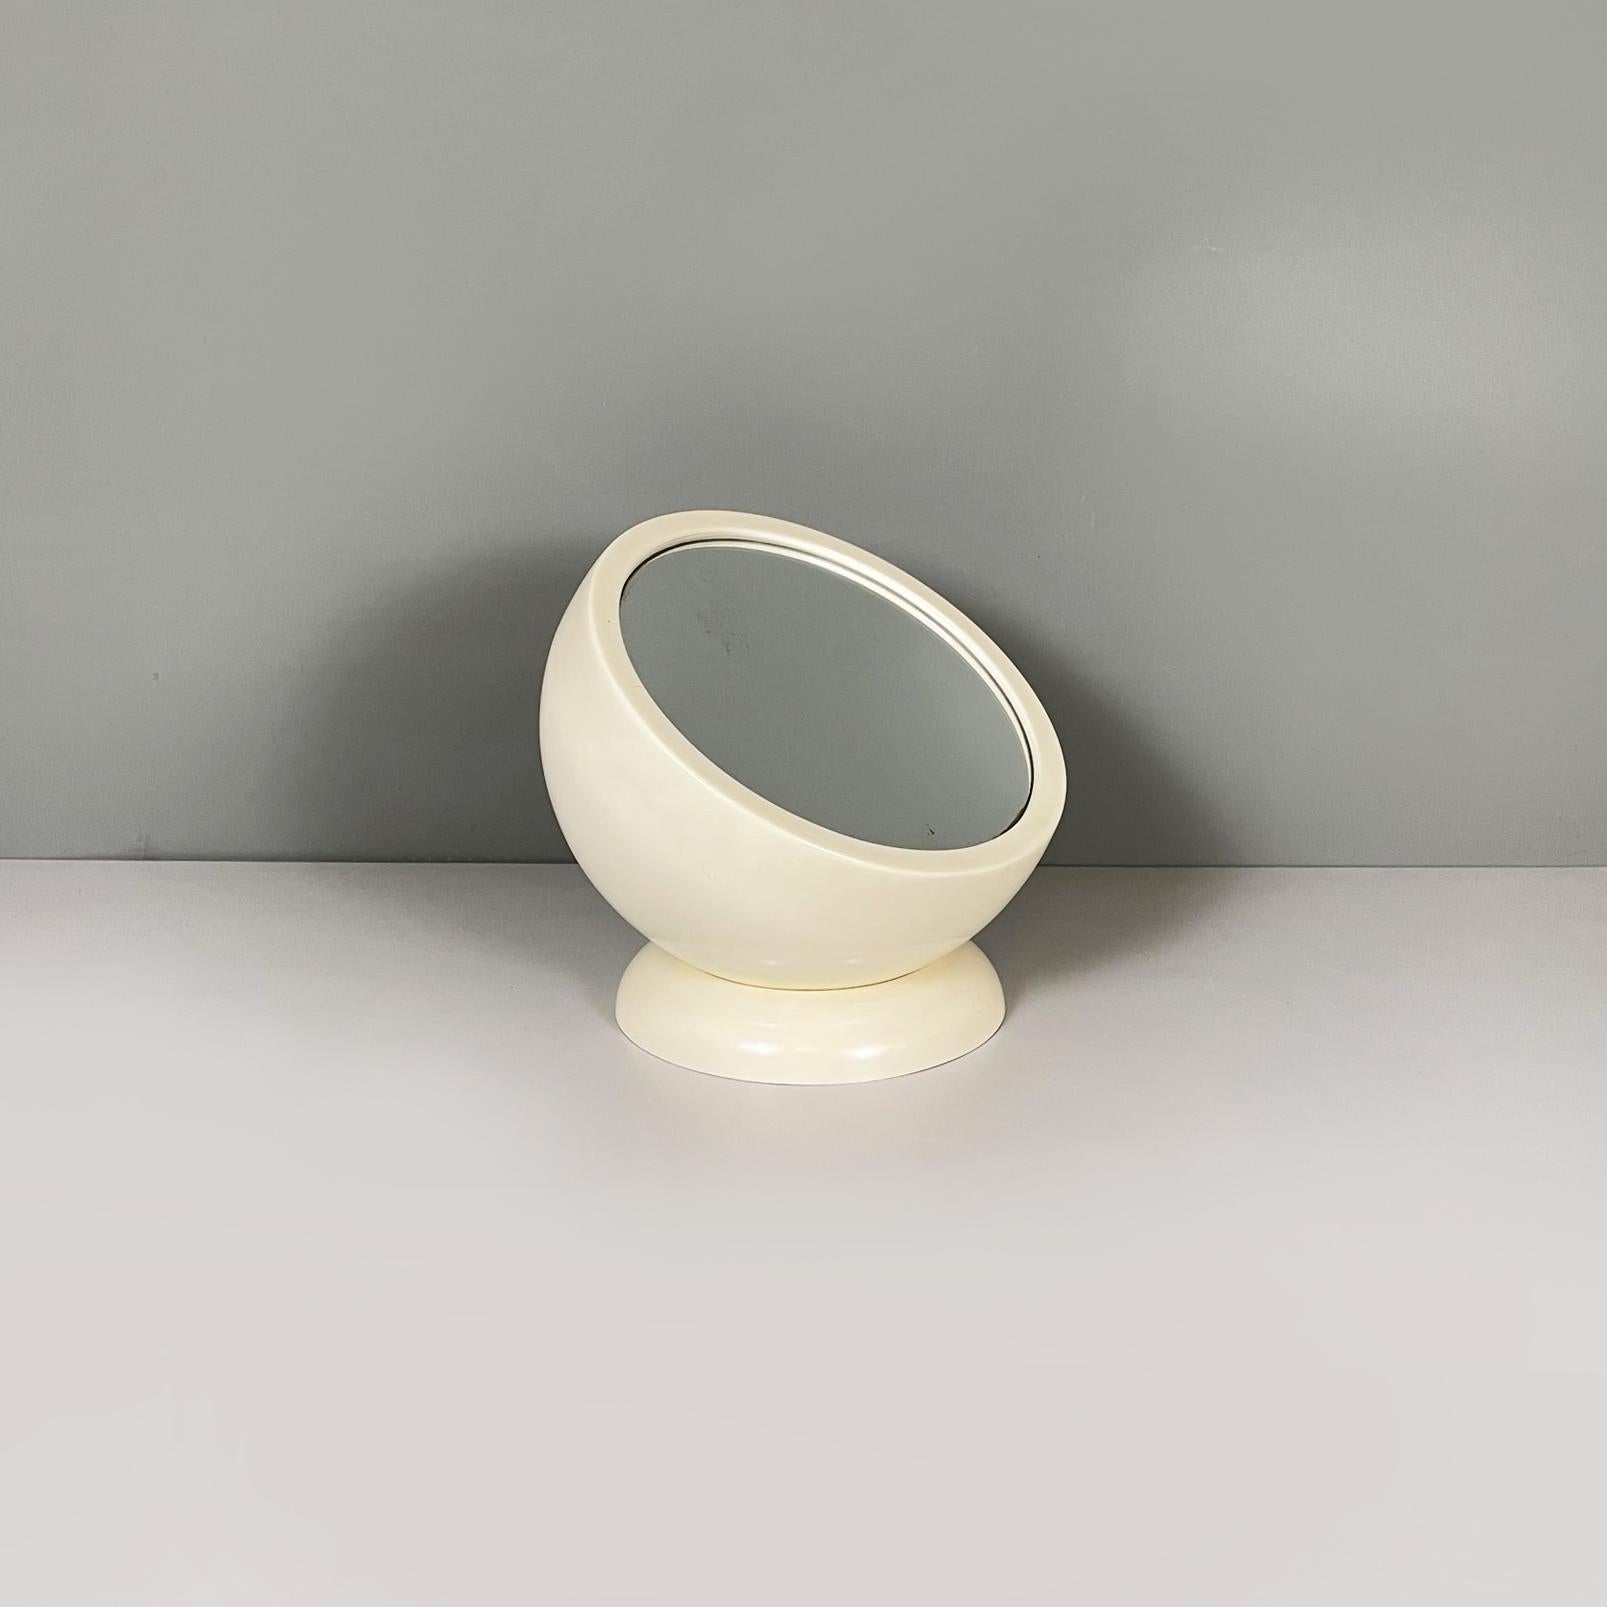 Italian space age adjustable table mirror in cream white ABS plastic by Filippo Panseca, 1970s
Table mirror with round mirror and round base, in cream white ABS plastic. The mirror rests on the base, so it can be positioned as desired. In Space Age